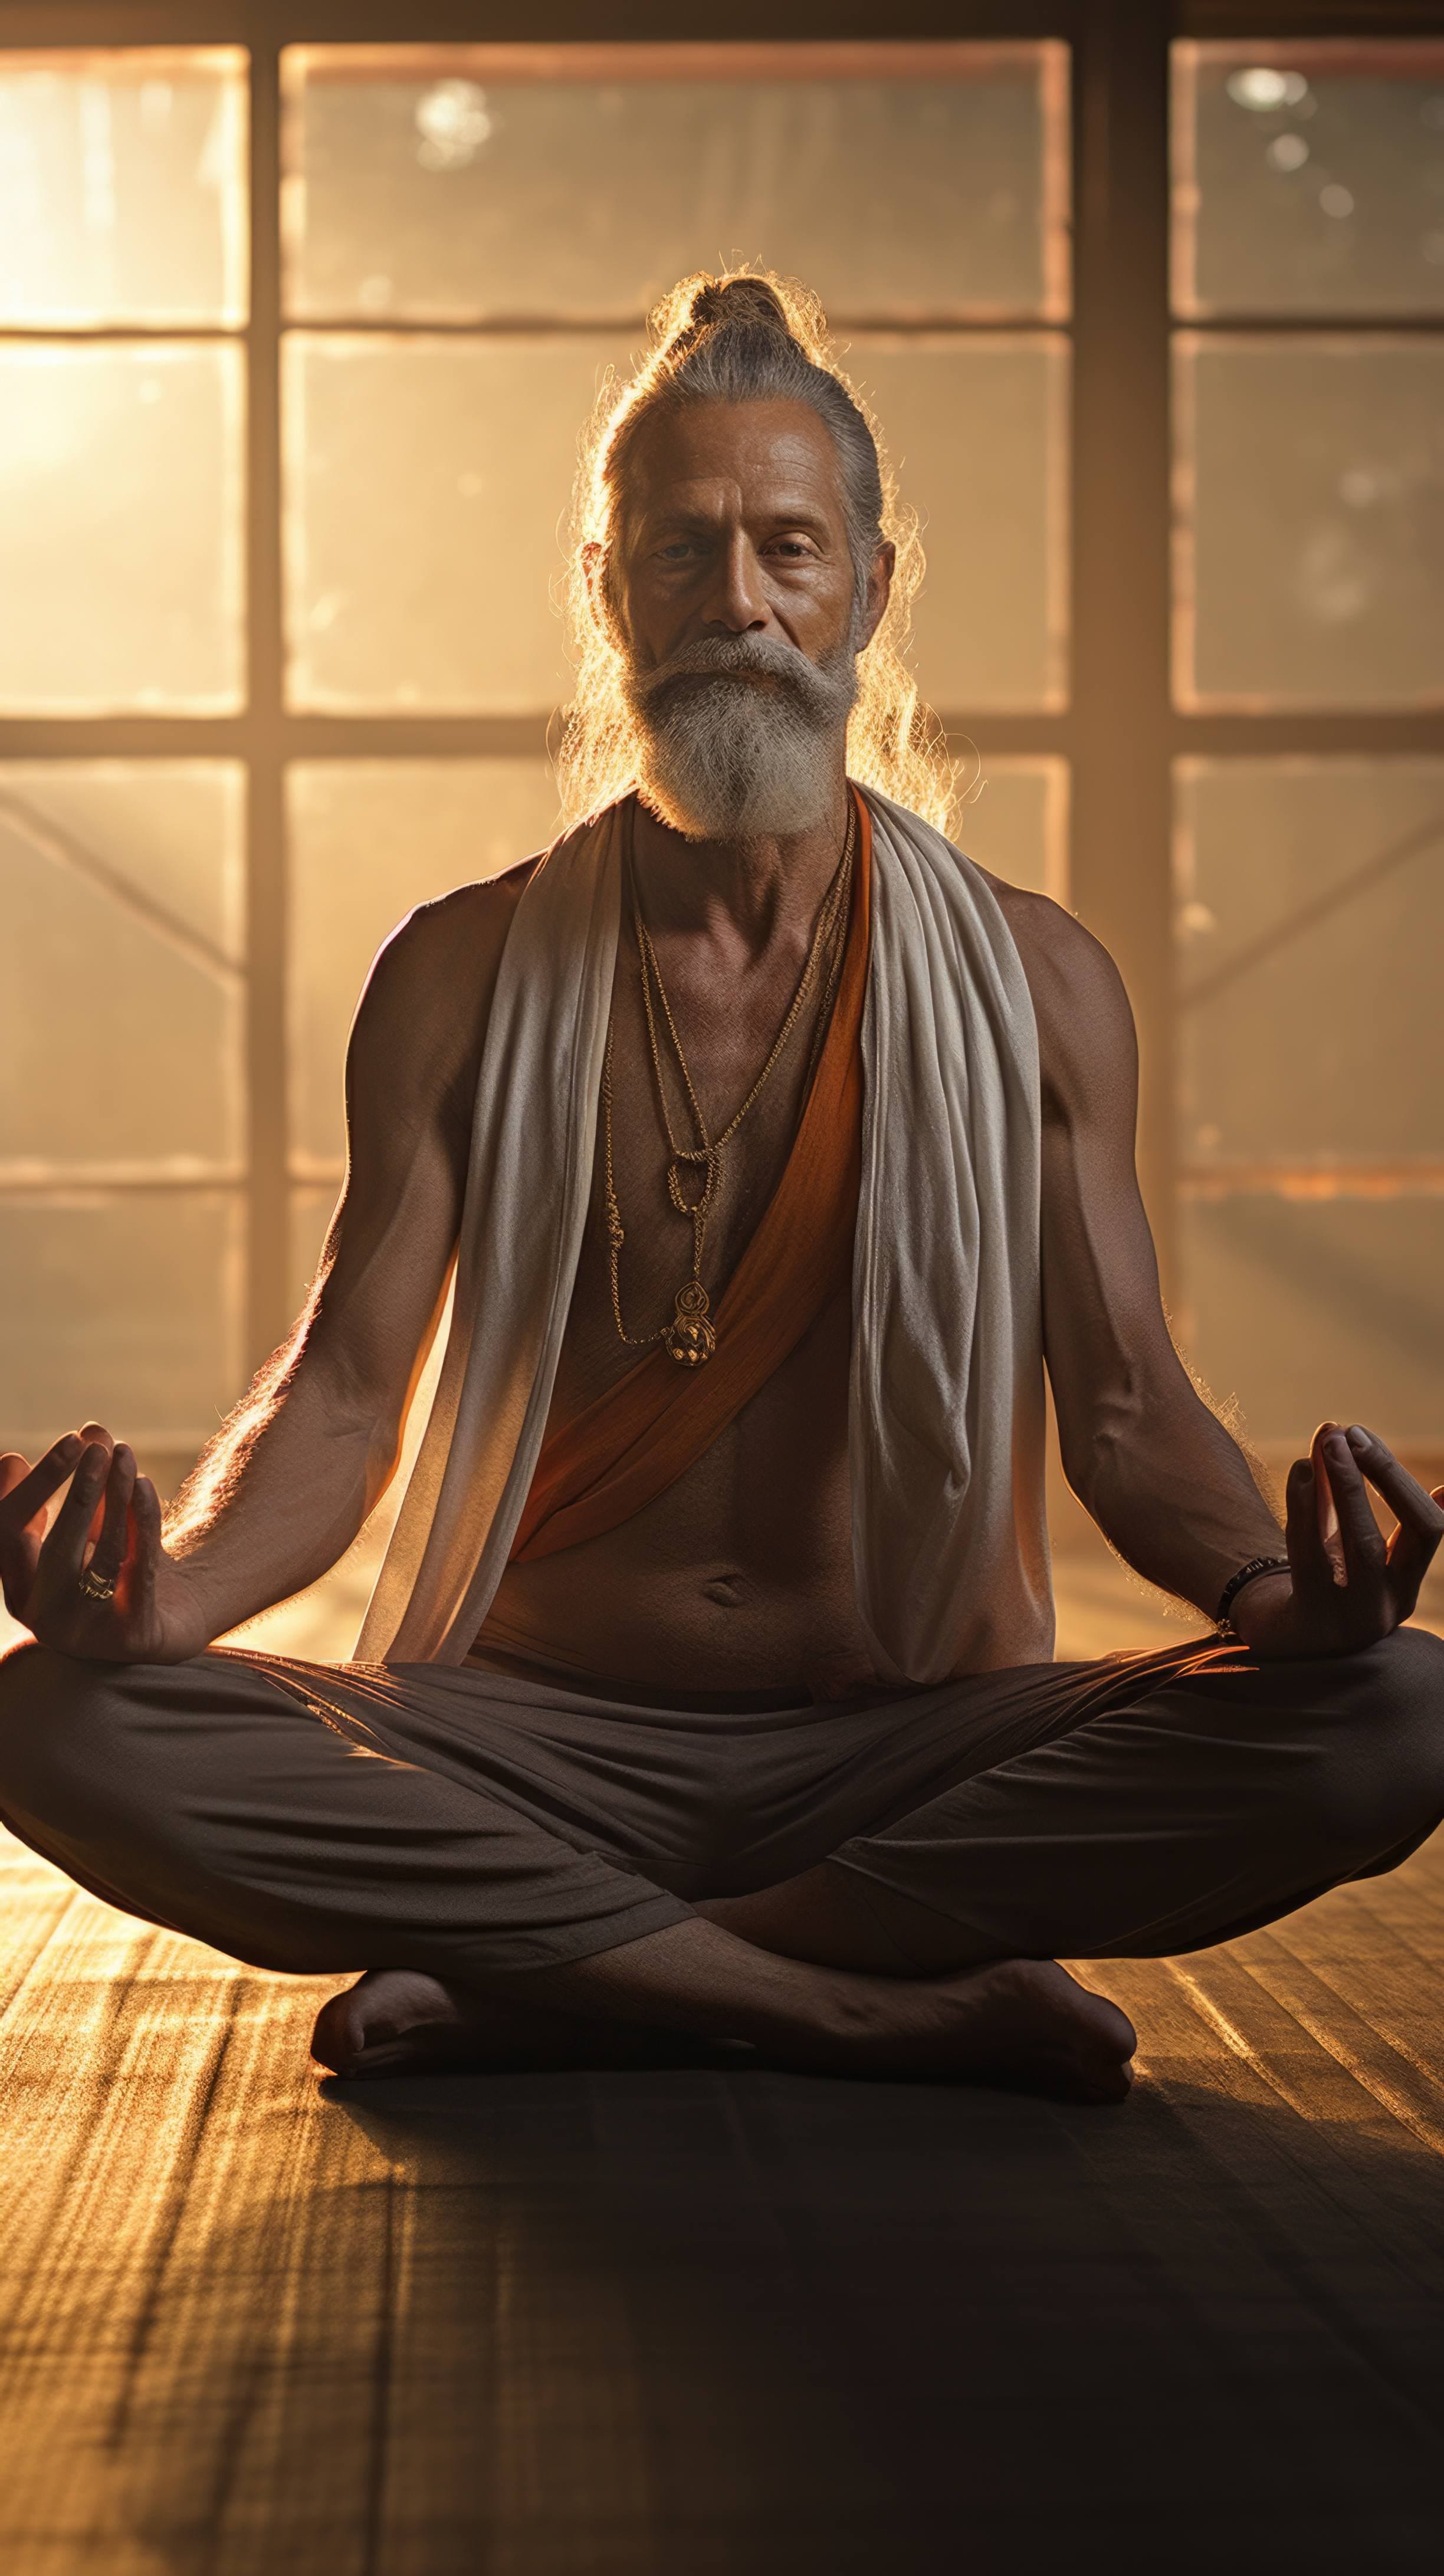 A person meditating with a serene expression.